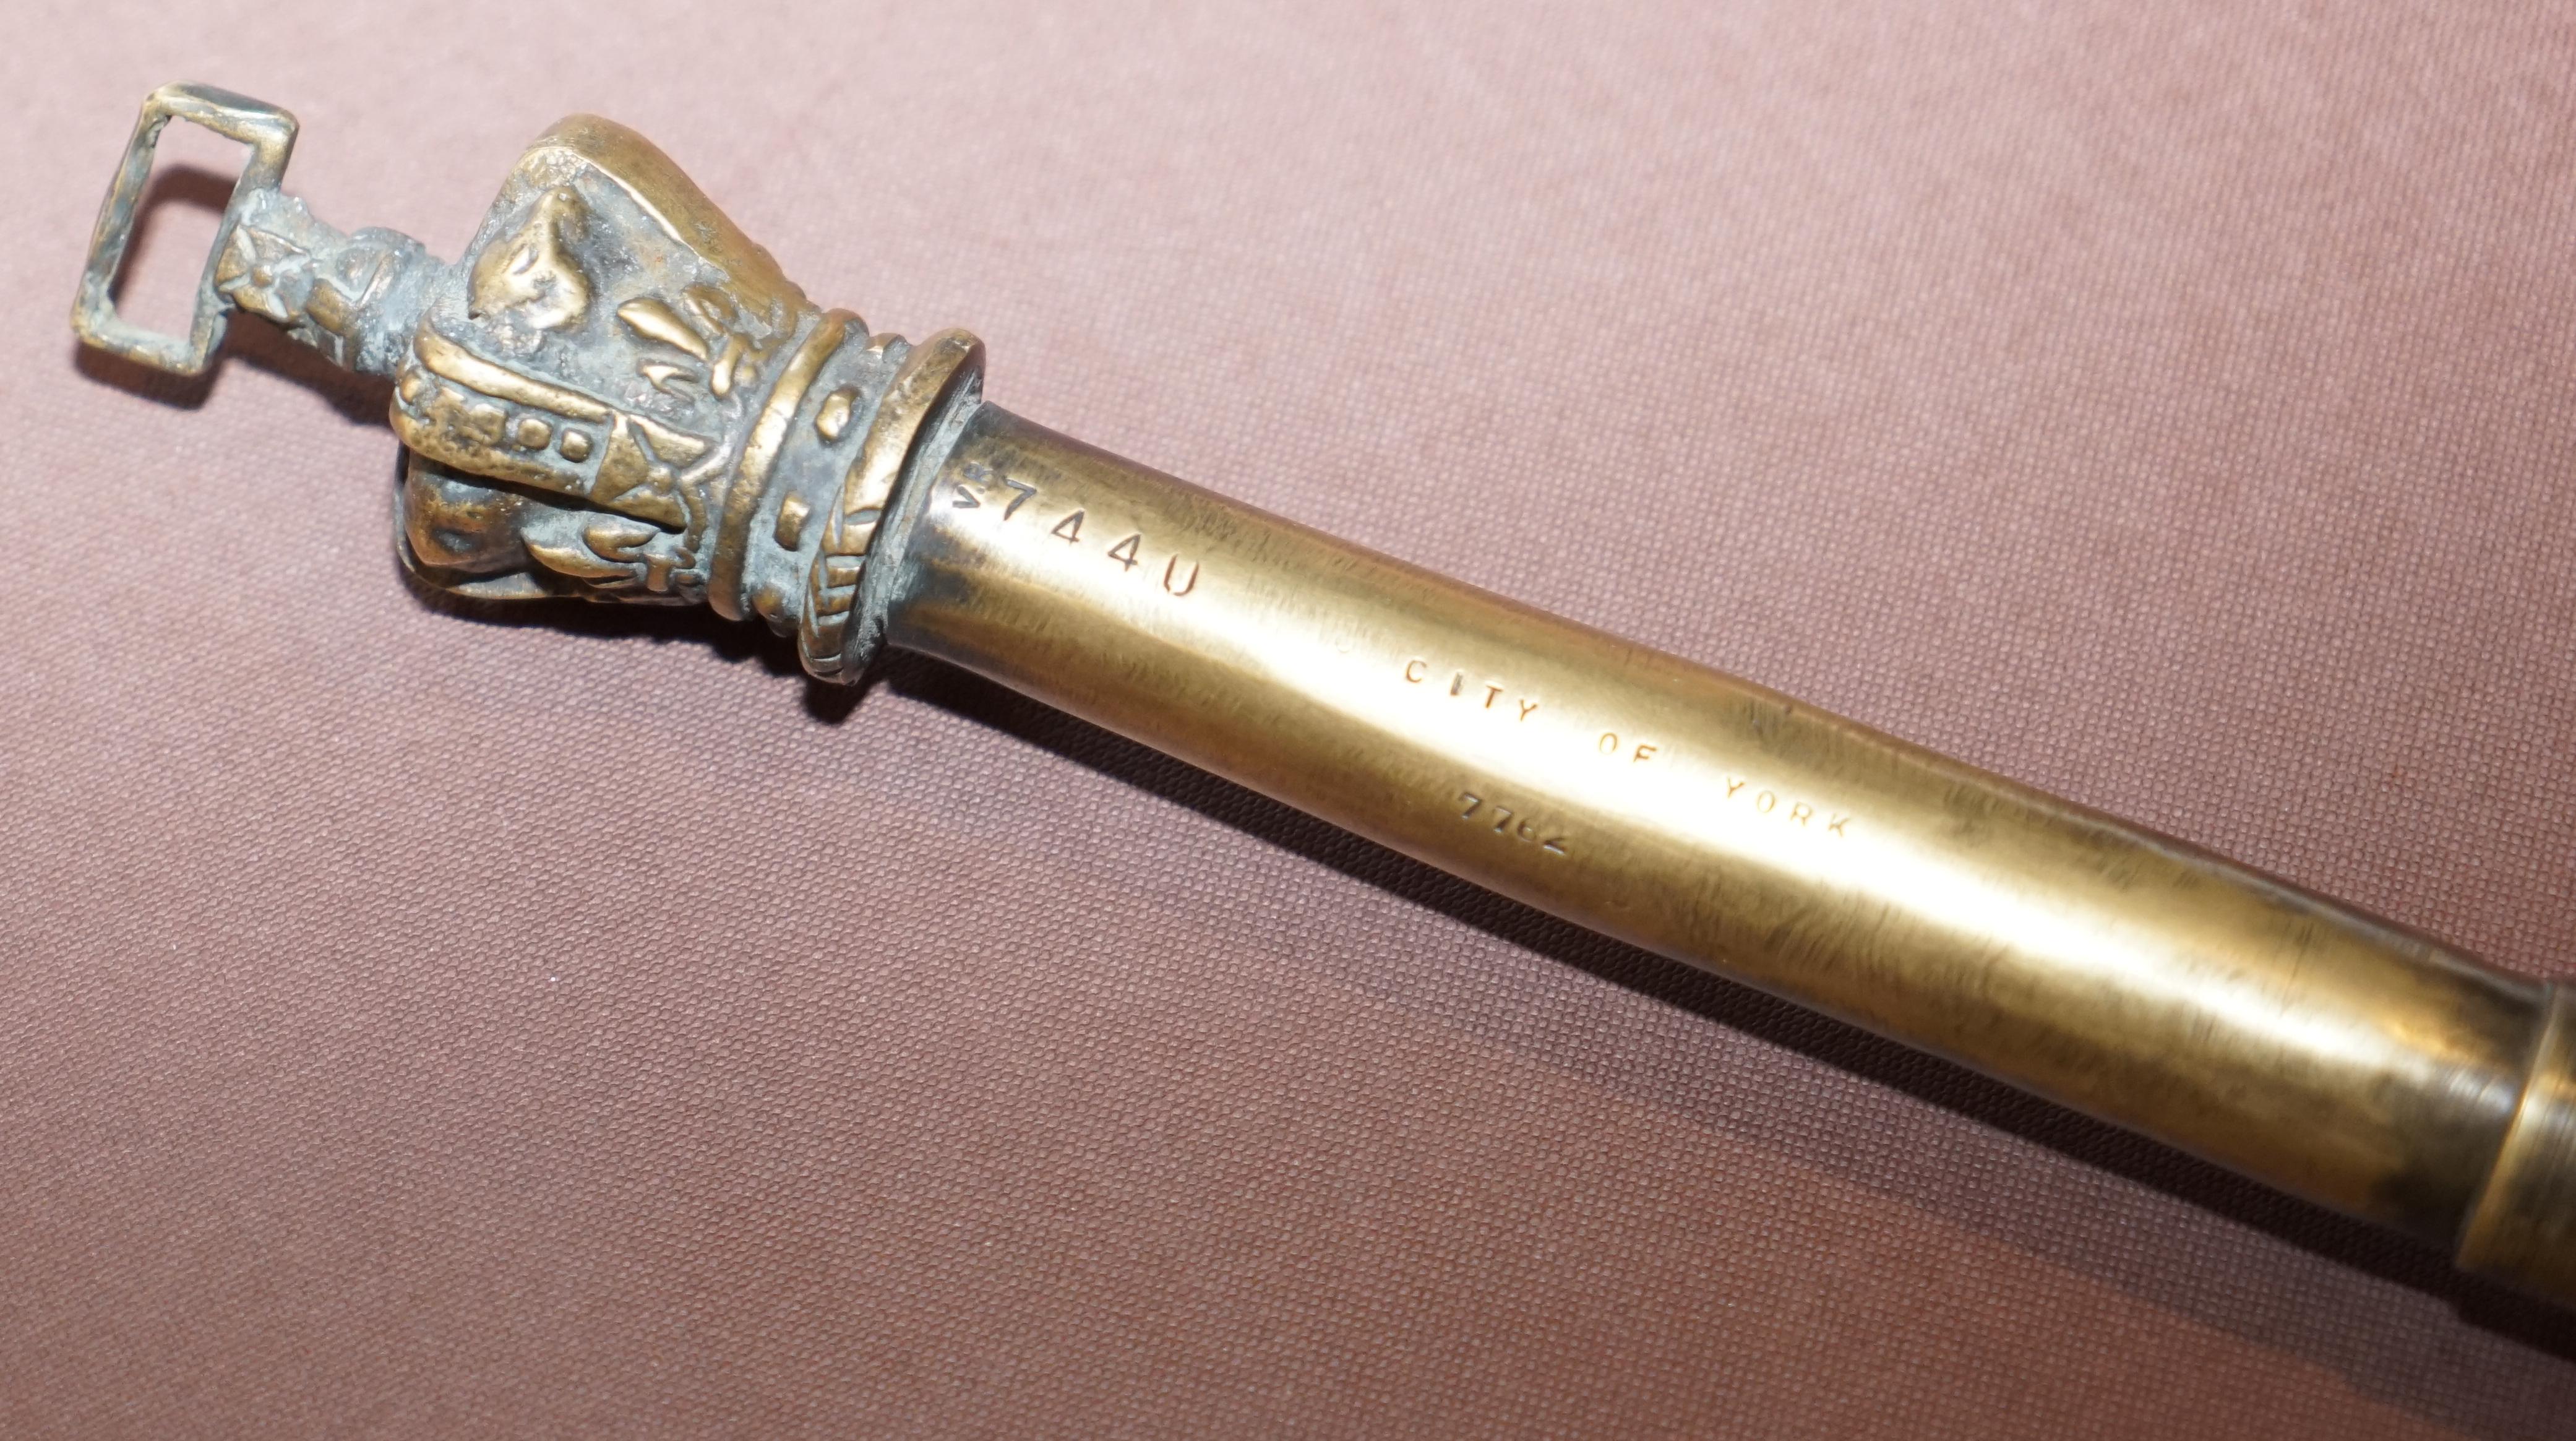 We are delighted to offer for sale this very rare Royal Sceptre or Mace in solid brass with a walnut handle and a large King Edward crown 

A one of a kind piece engraved VR for Victorian Regina meaning made in the reign of Queen Victoria, also